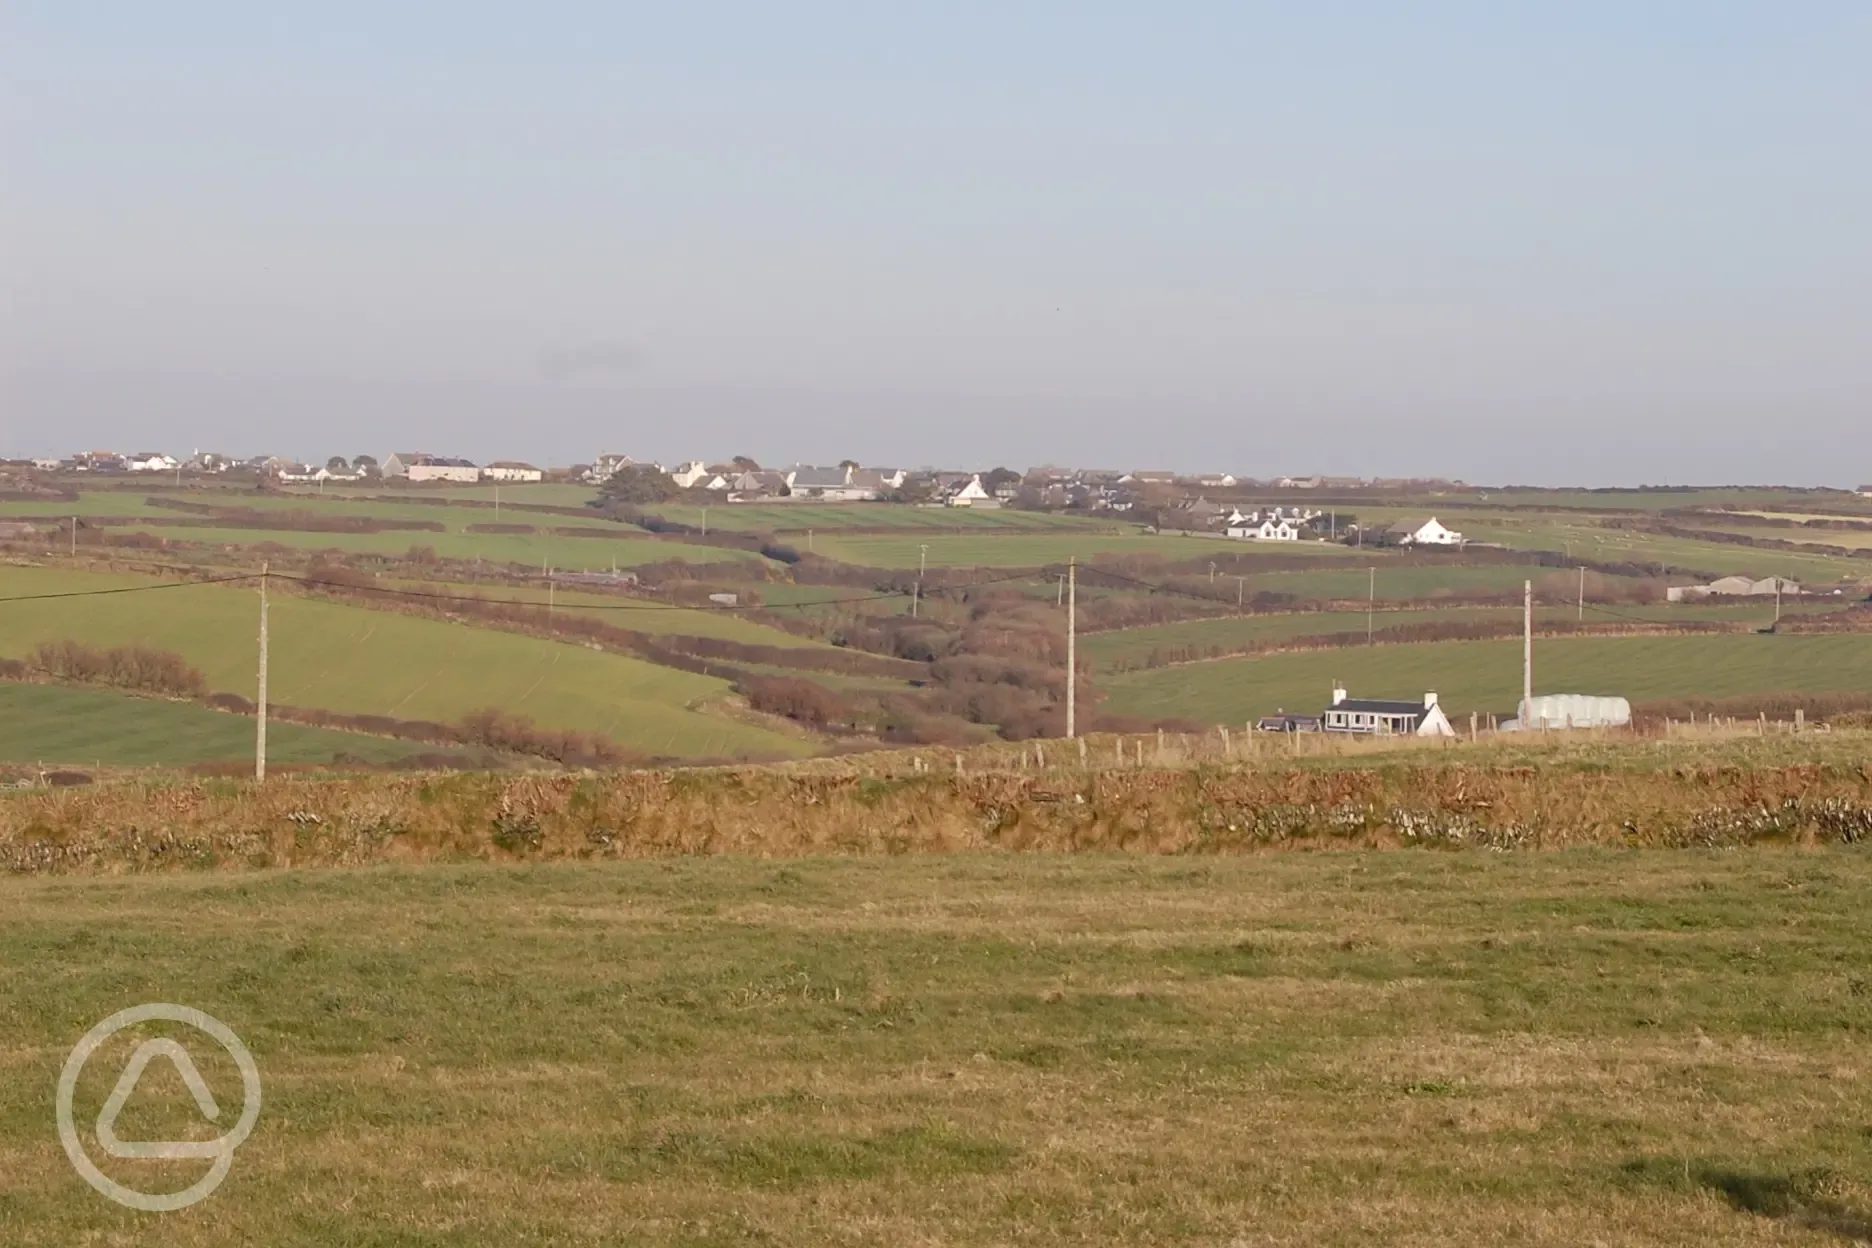 View inland to Bodmin